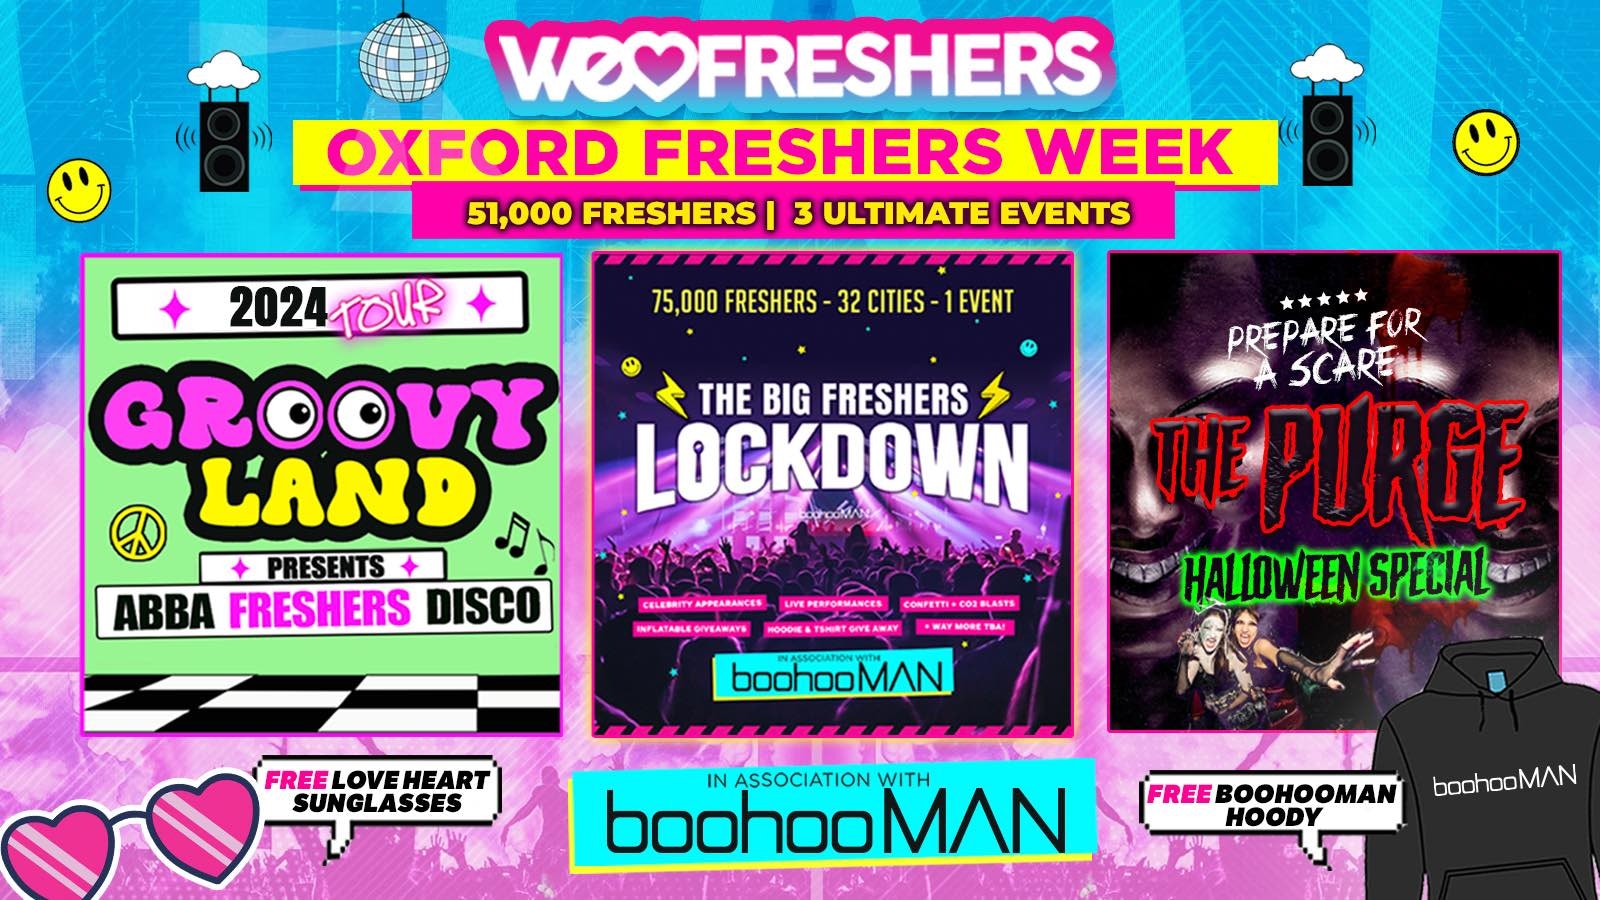 WE LOVE OXFORD FRESHERS 2024 in association with boohooMAN – 3 EVENTS❗